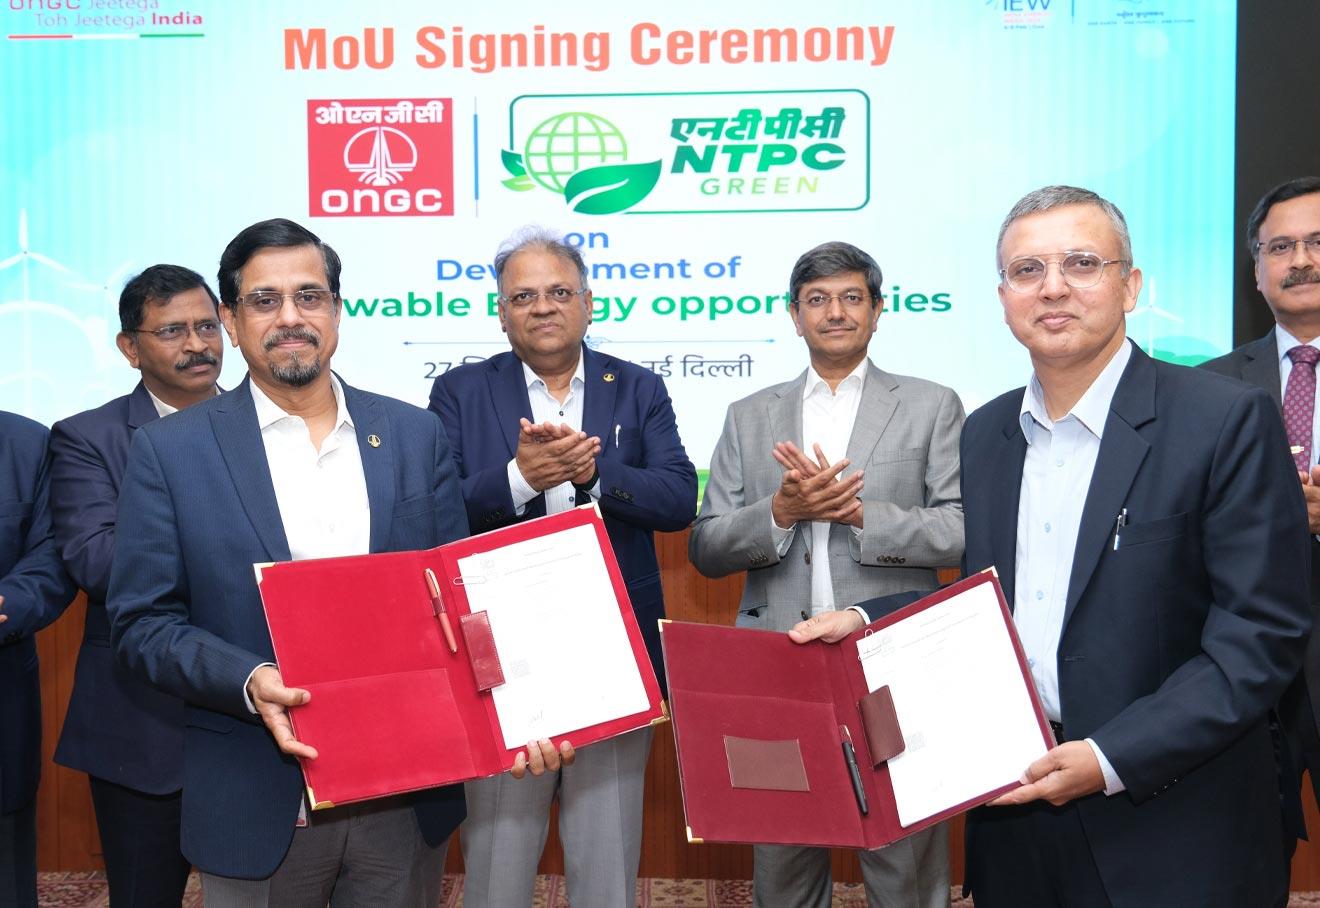 ONGC Inks Mou With NTPC Green Energy For Renewable Energy, Offshore Wind Power Projects